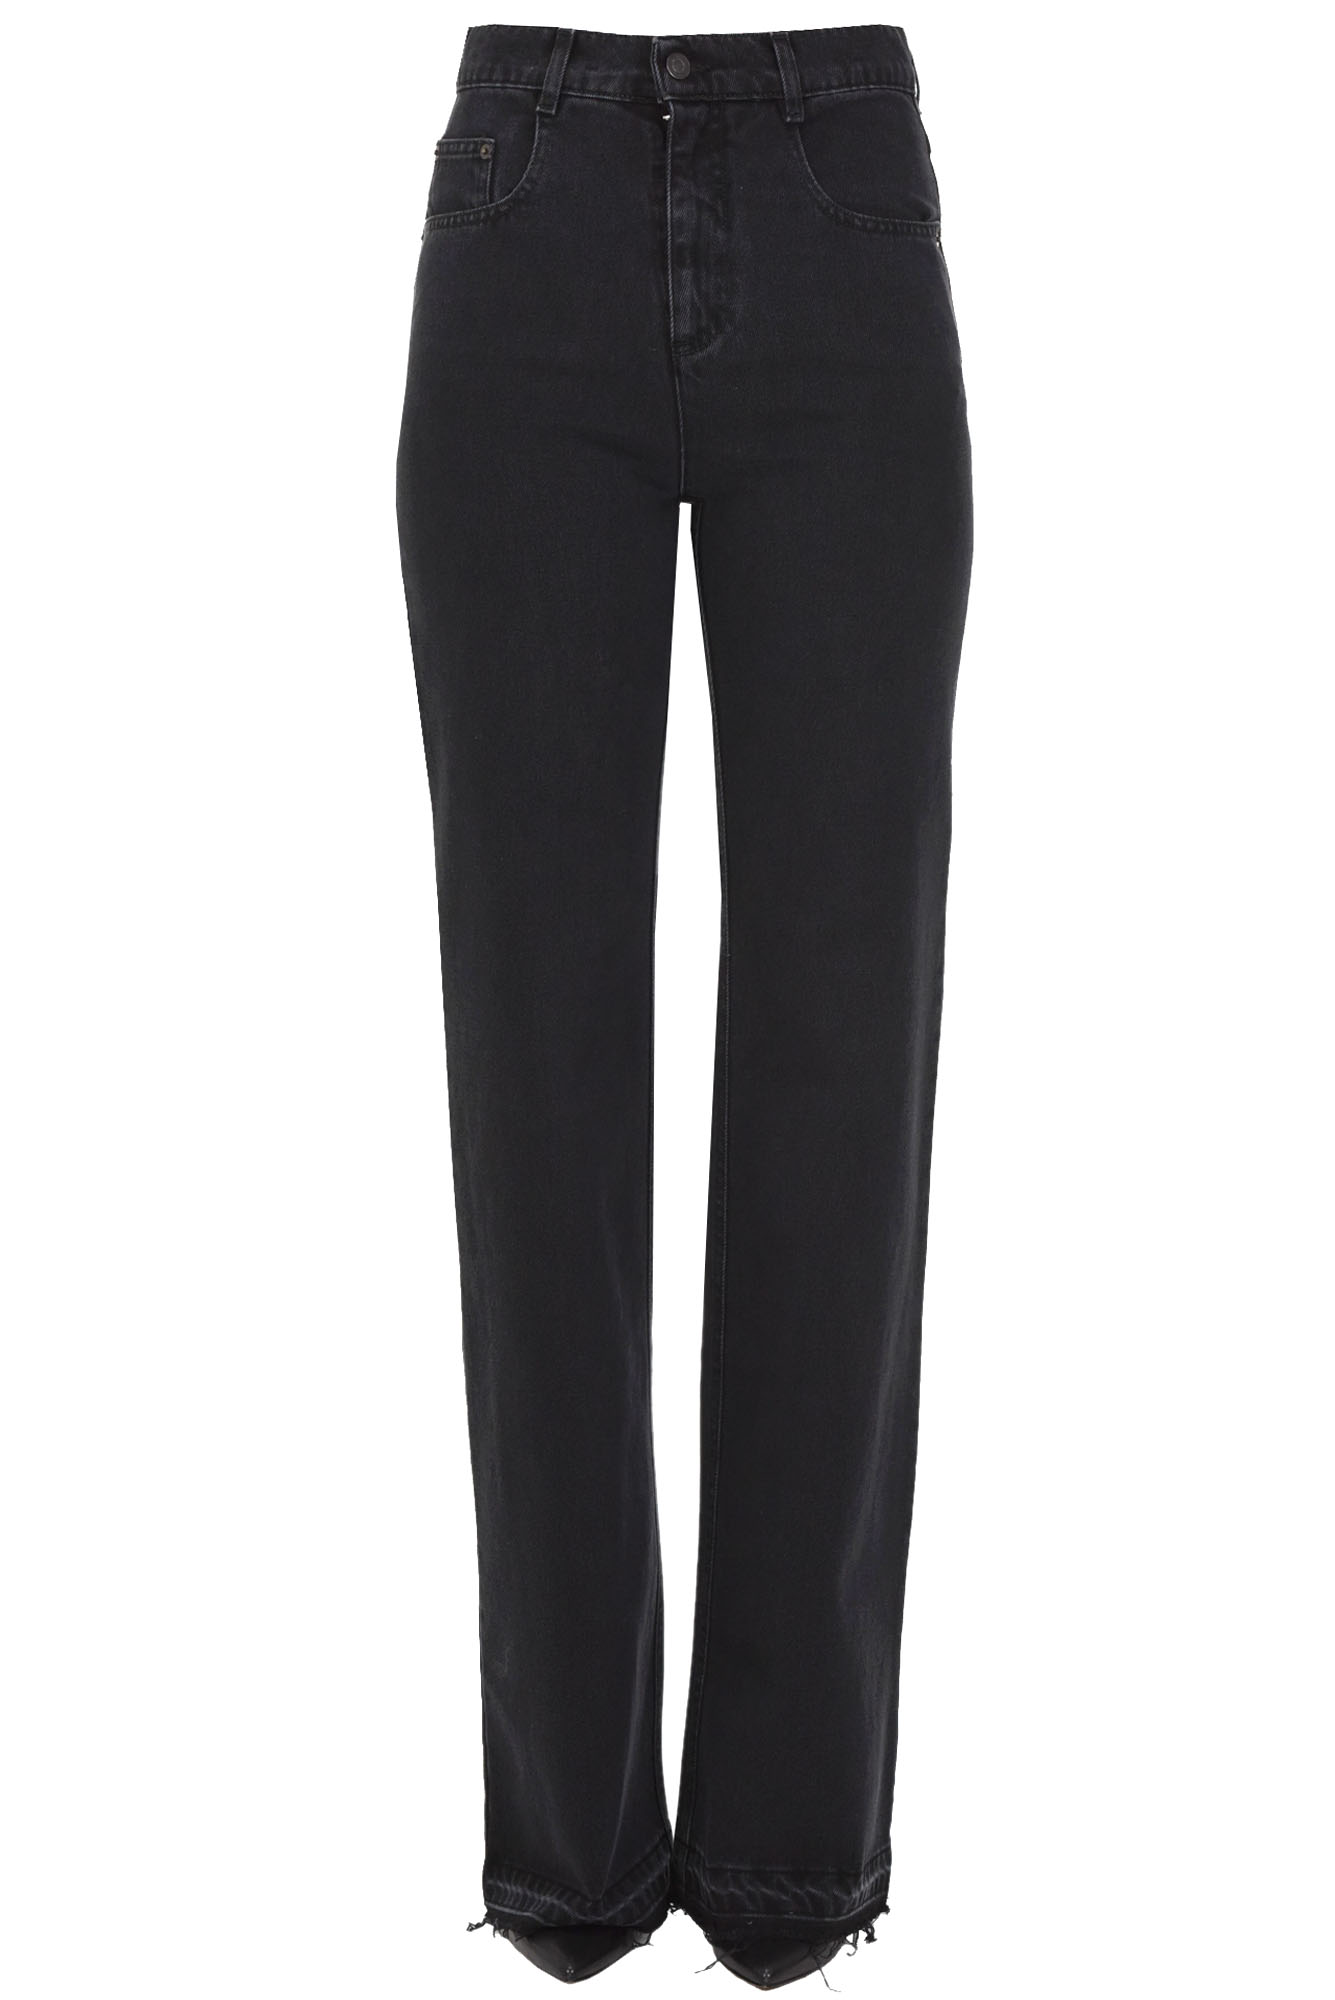 N°21 Wide And Straight Leg Jeans In Black